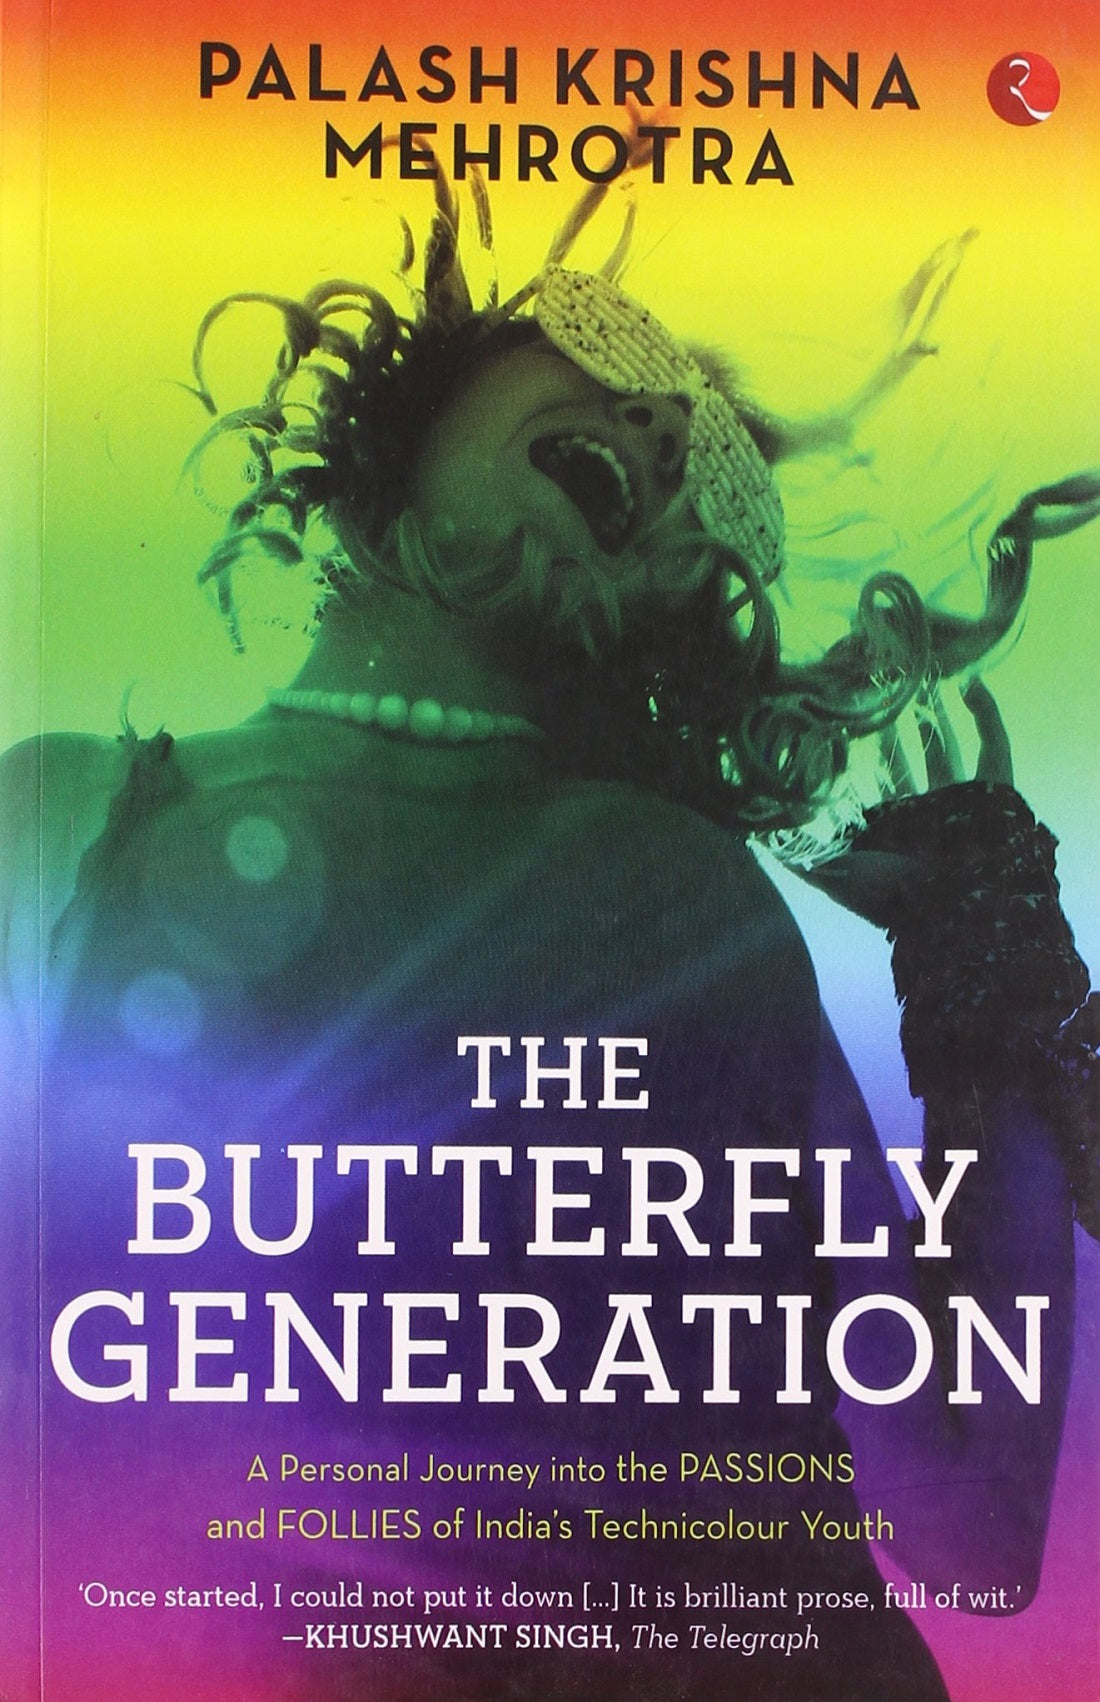 THE BUTTERFLY GENERATION